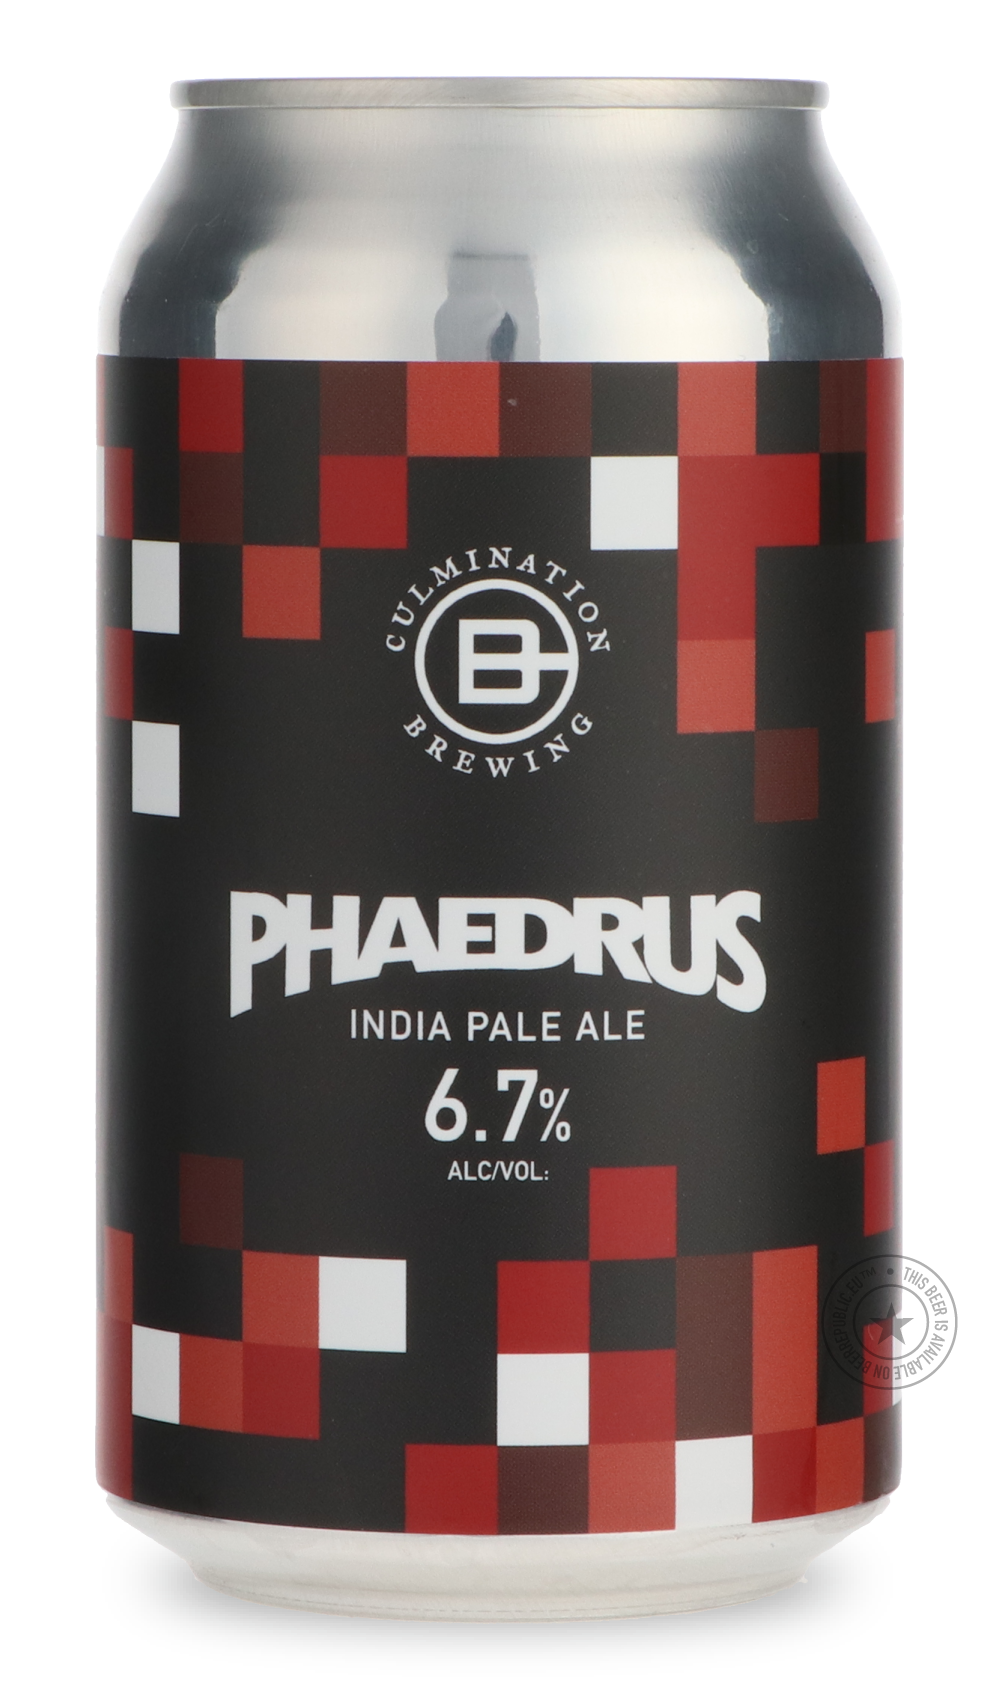 -Culmination- Phaedrus IPA-IPA- Only @ Beer Republic - The best online beer store for American & Canadian craft beer - Buy beer online from the USA and Canada - Bier online kopen - Amerikaans bier kopen - Craft beer store - Craft beer kopen - Amerikanisch bier kaufen - Bier online kaufen - Acheter biere online - IPA - Stout - Porter - New England IPA - Hazy IPA - Imperial Stout - Barrel Aged - Barrel Aged Imperial Stout - Brown - Dark beer - Blond - Blonde - Pilsner - Lager - Wheat - Weizen - Amber - Barley